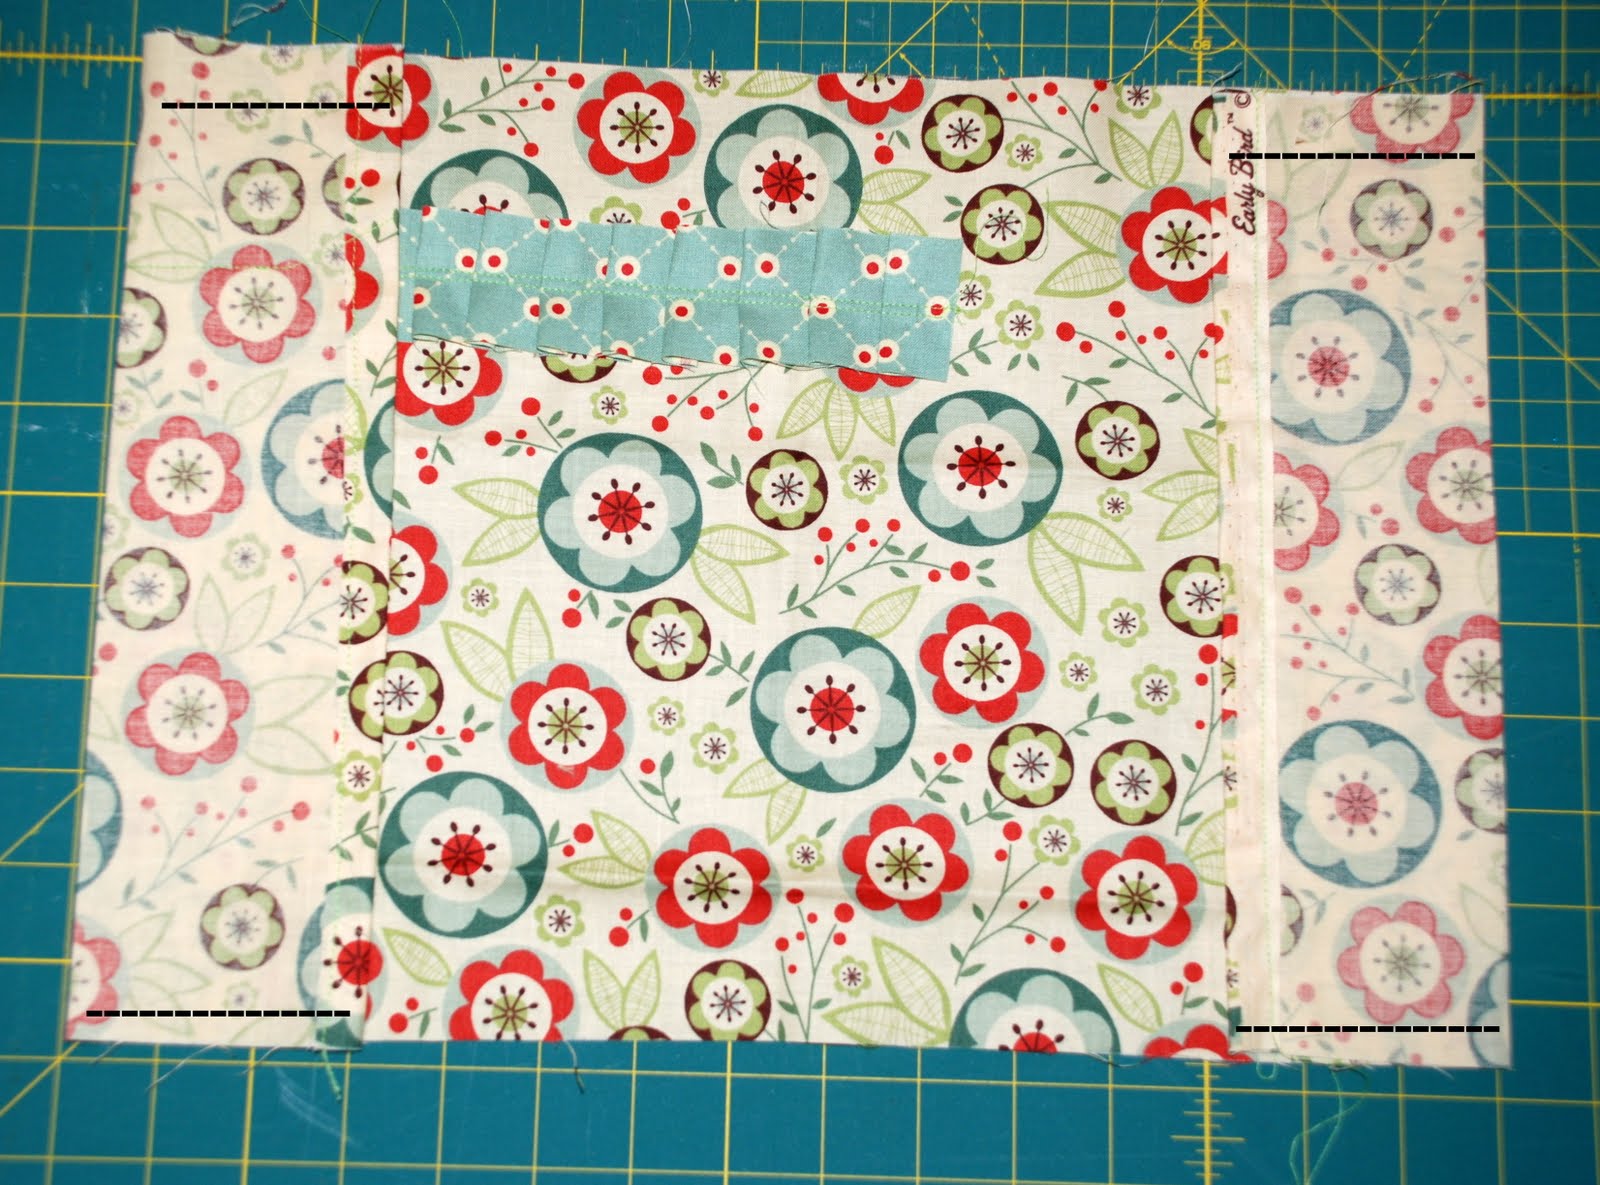 Yards and Yards: Yards and Yards Original: Fabric Notebook Cover